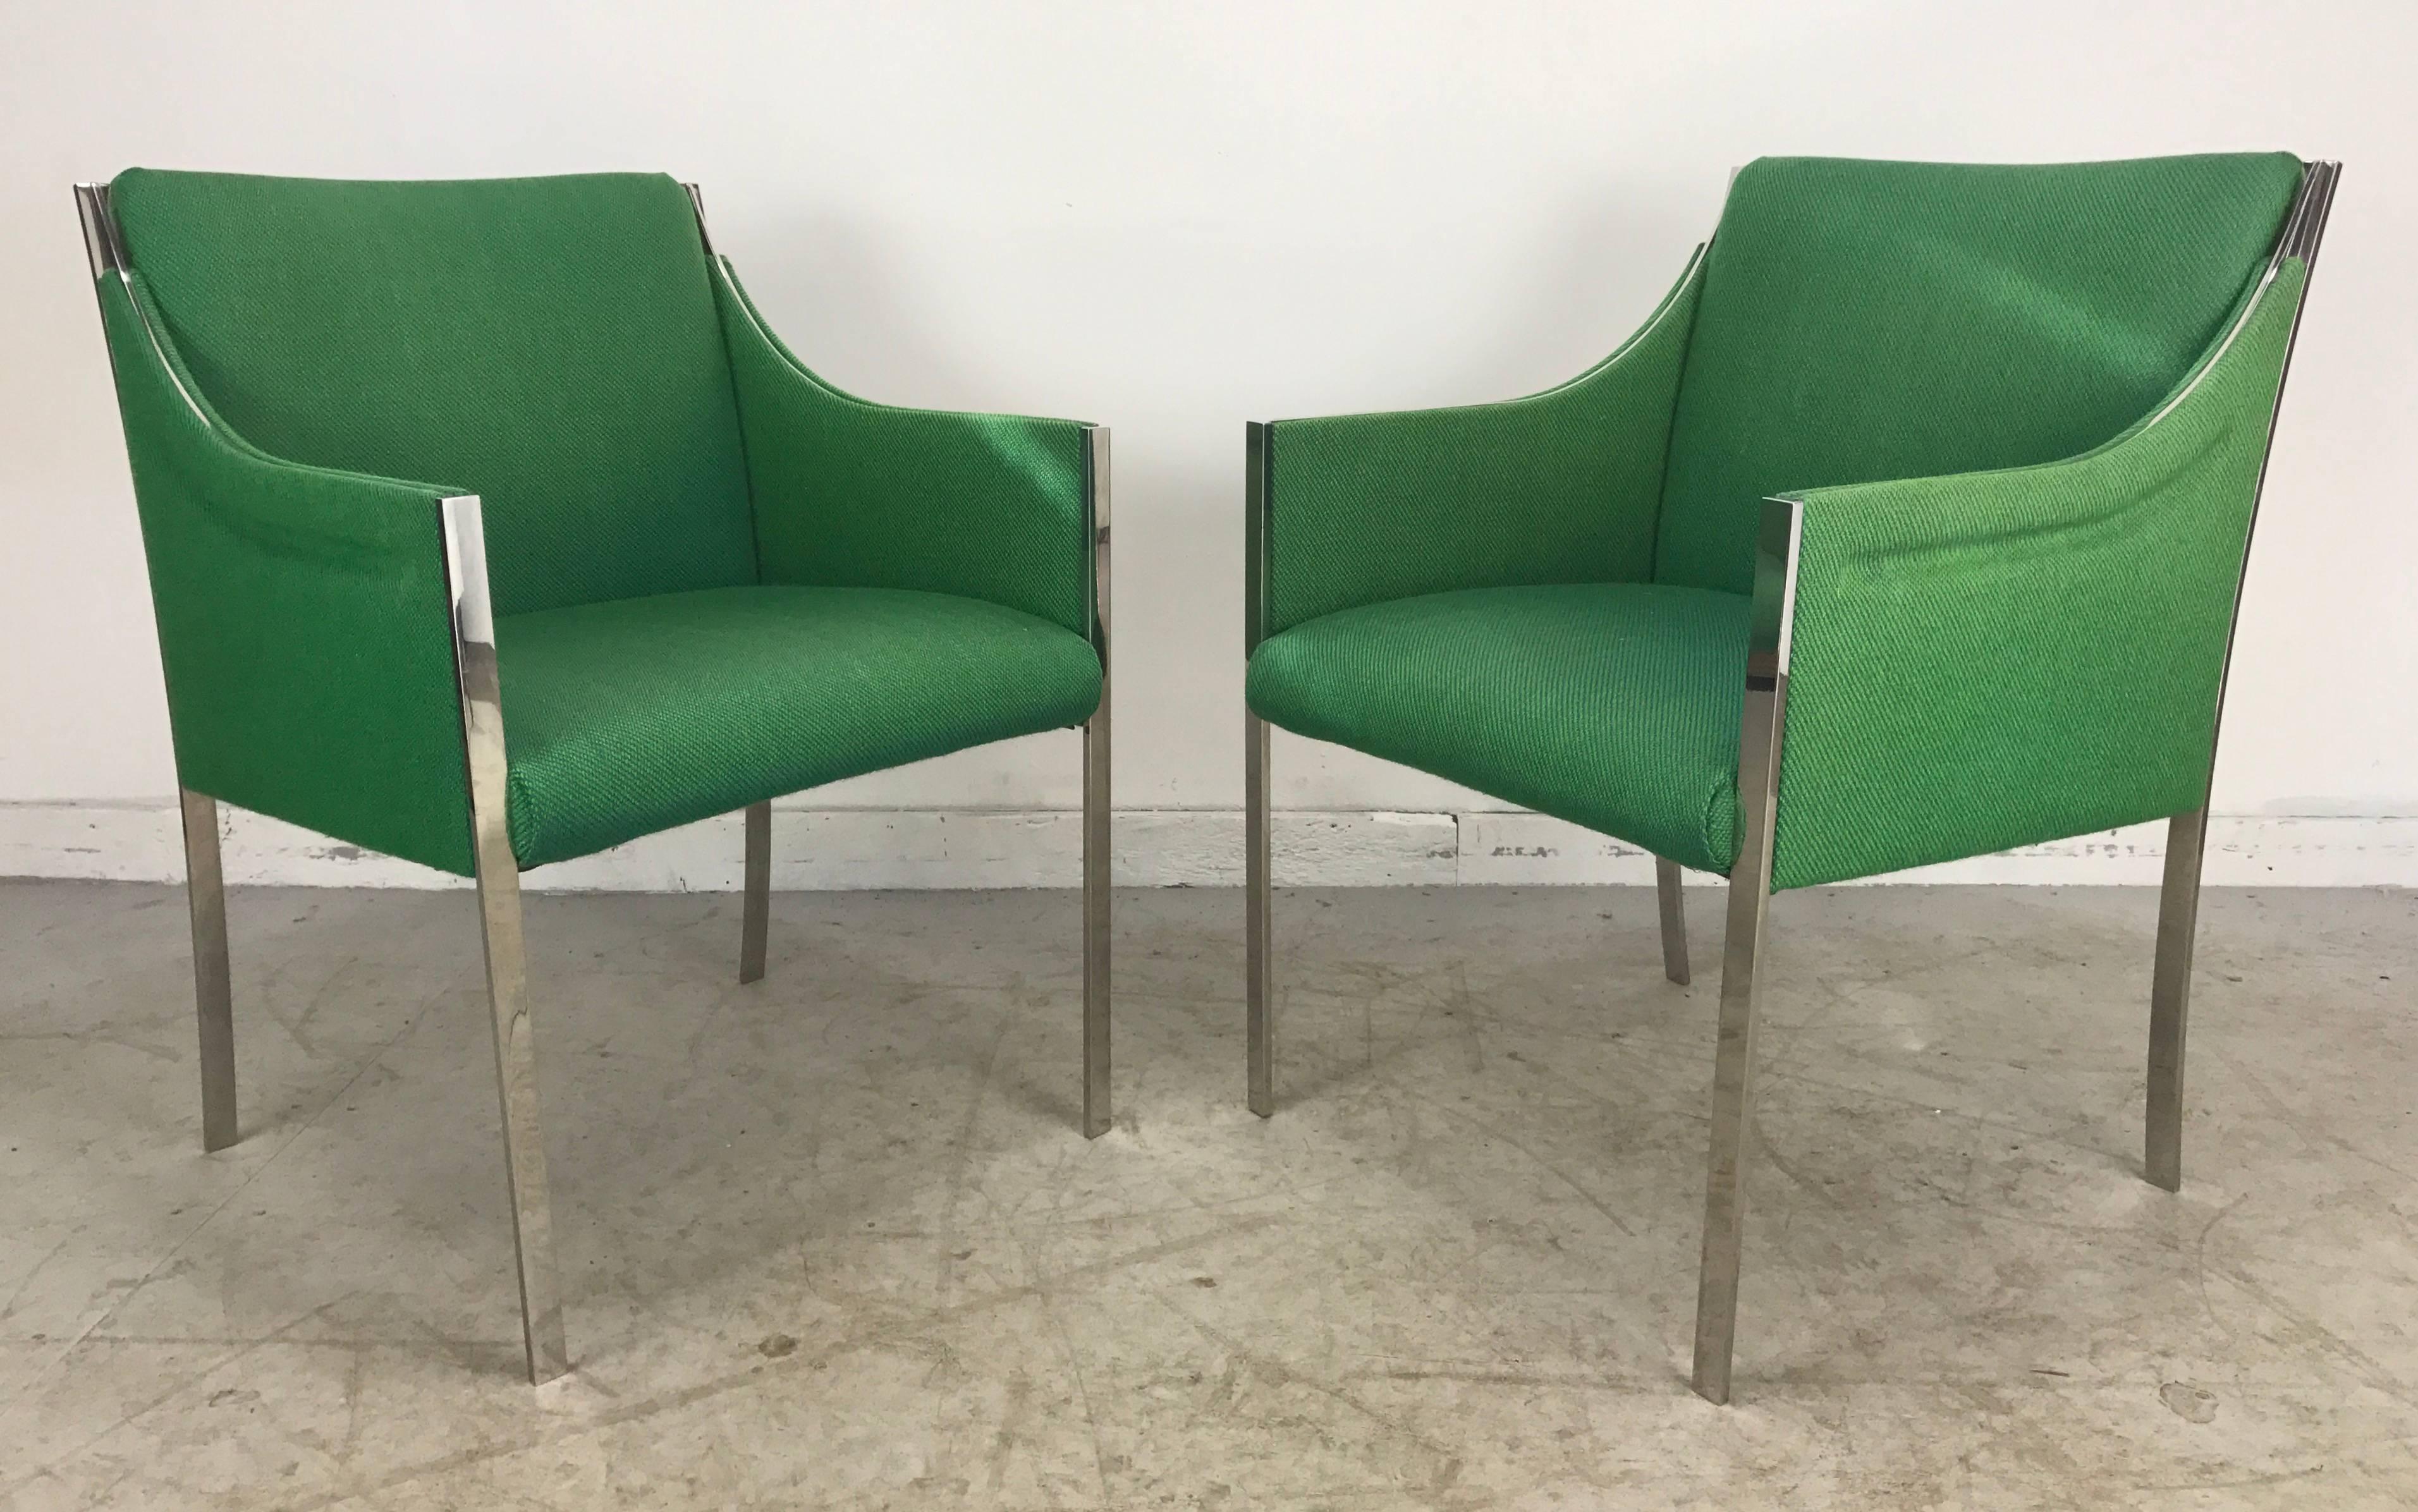 Stainless Steel Rare Chromed Steel and Wool Lounge Chairs by Jens Risom